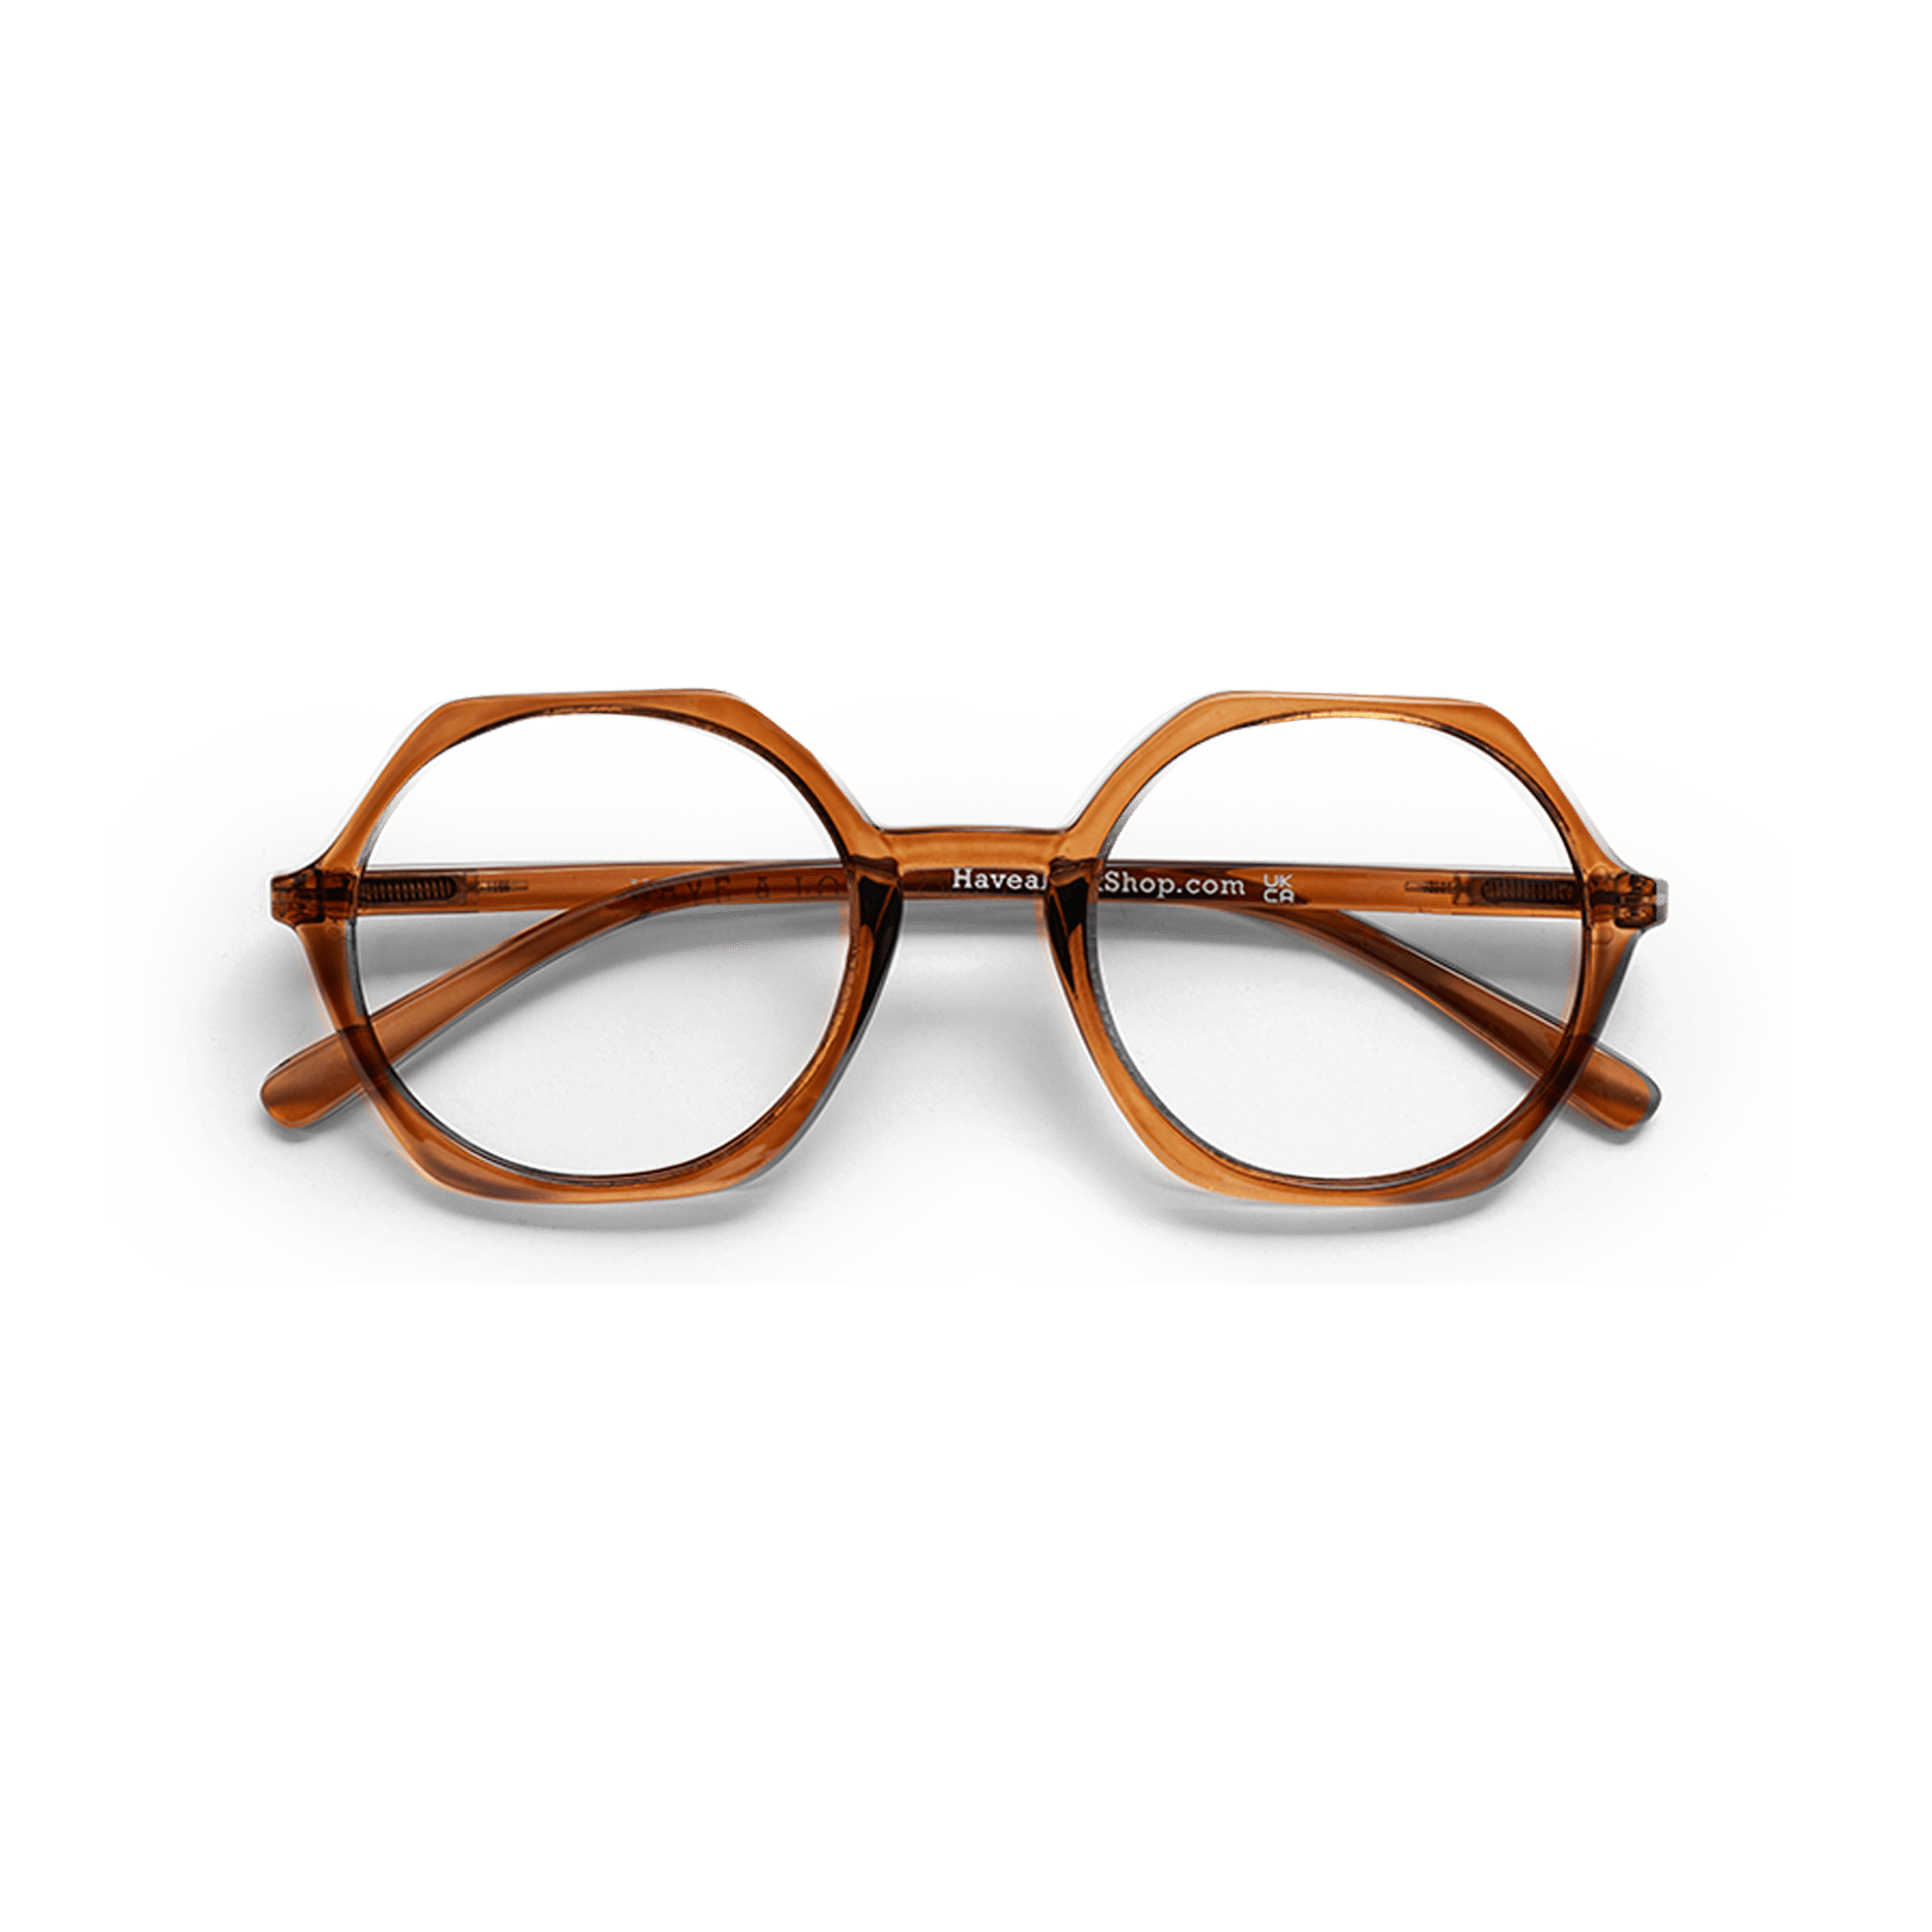 Clear lens glasses Edgy - brown